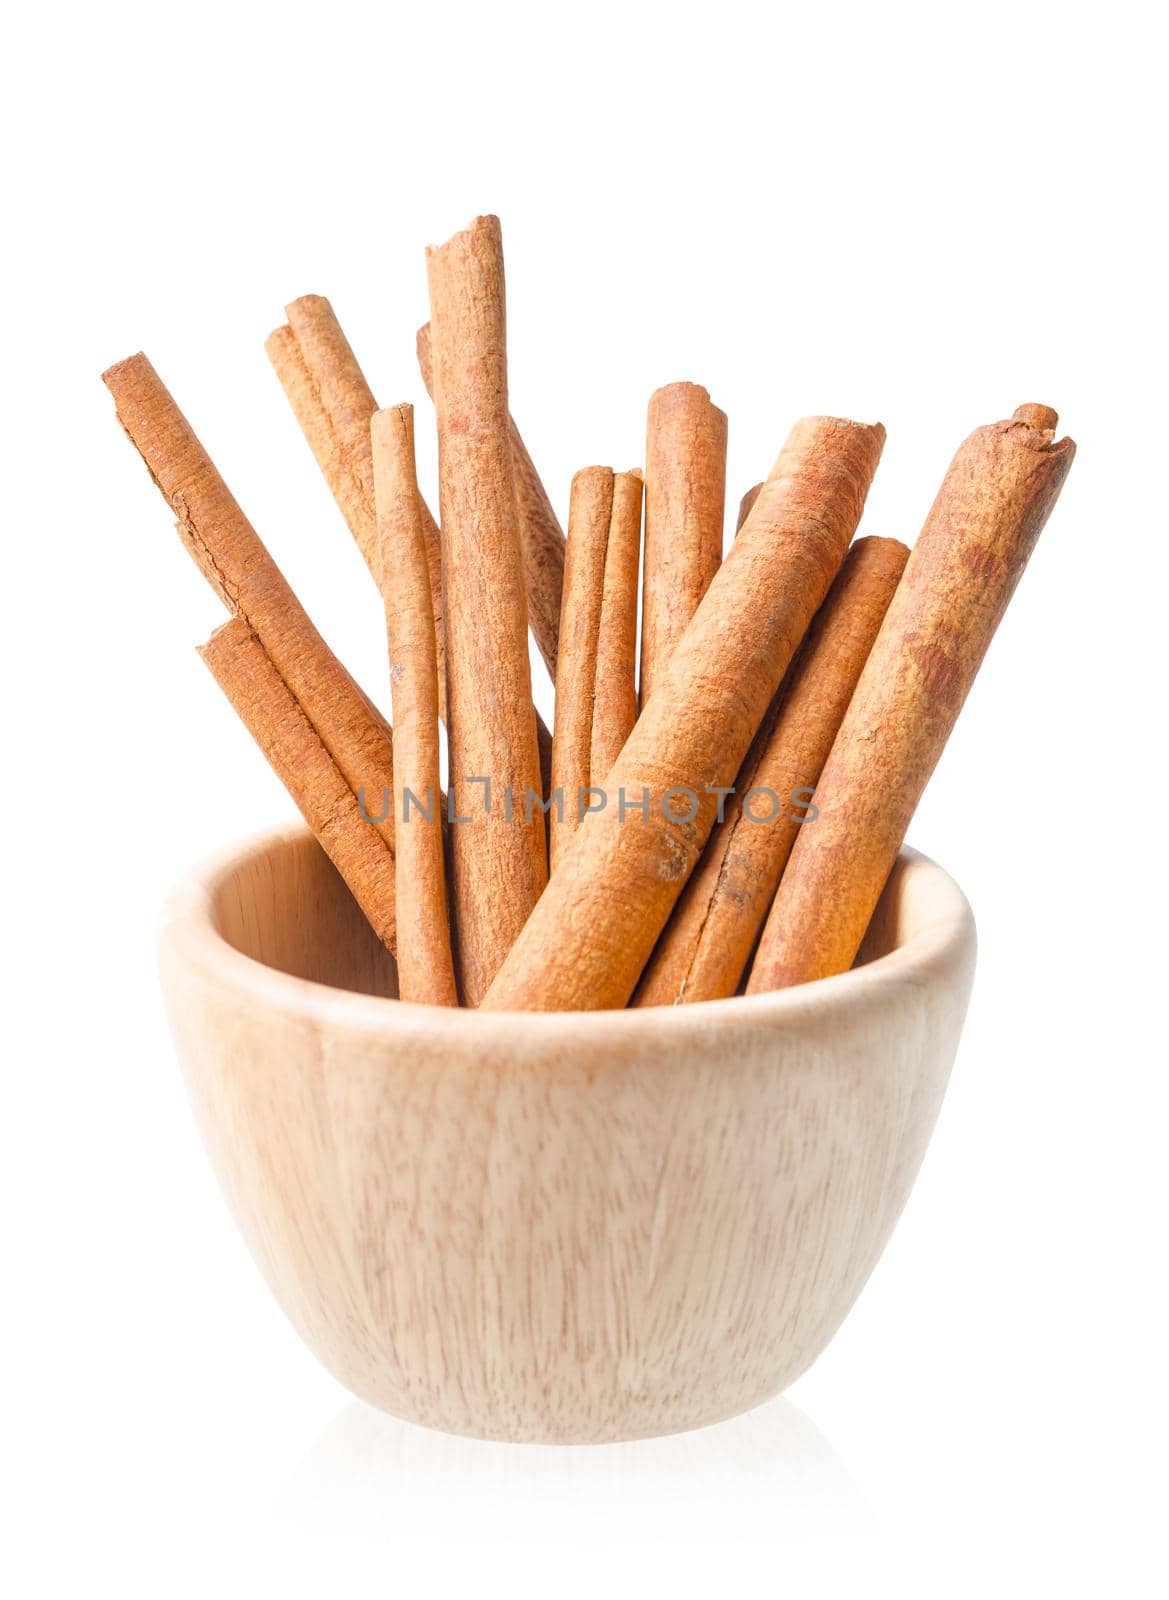 Cinnamon sticks in wooden bowl isolated on white background. by Gamjai